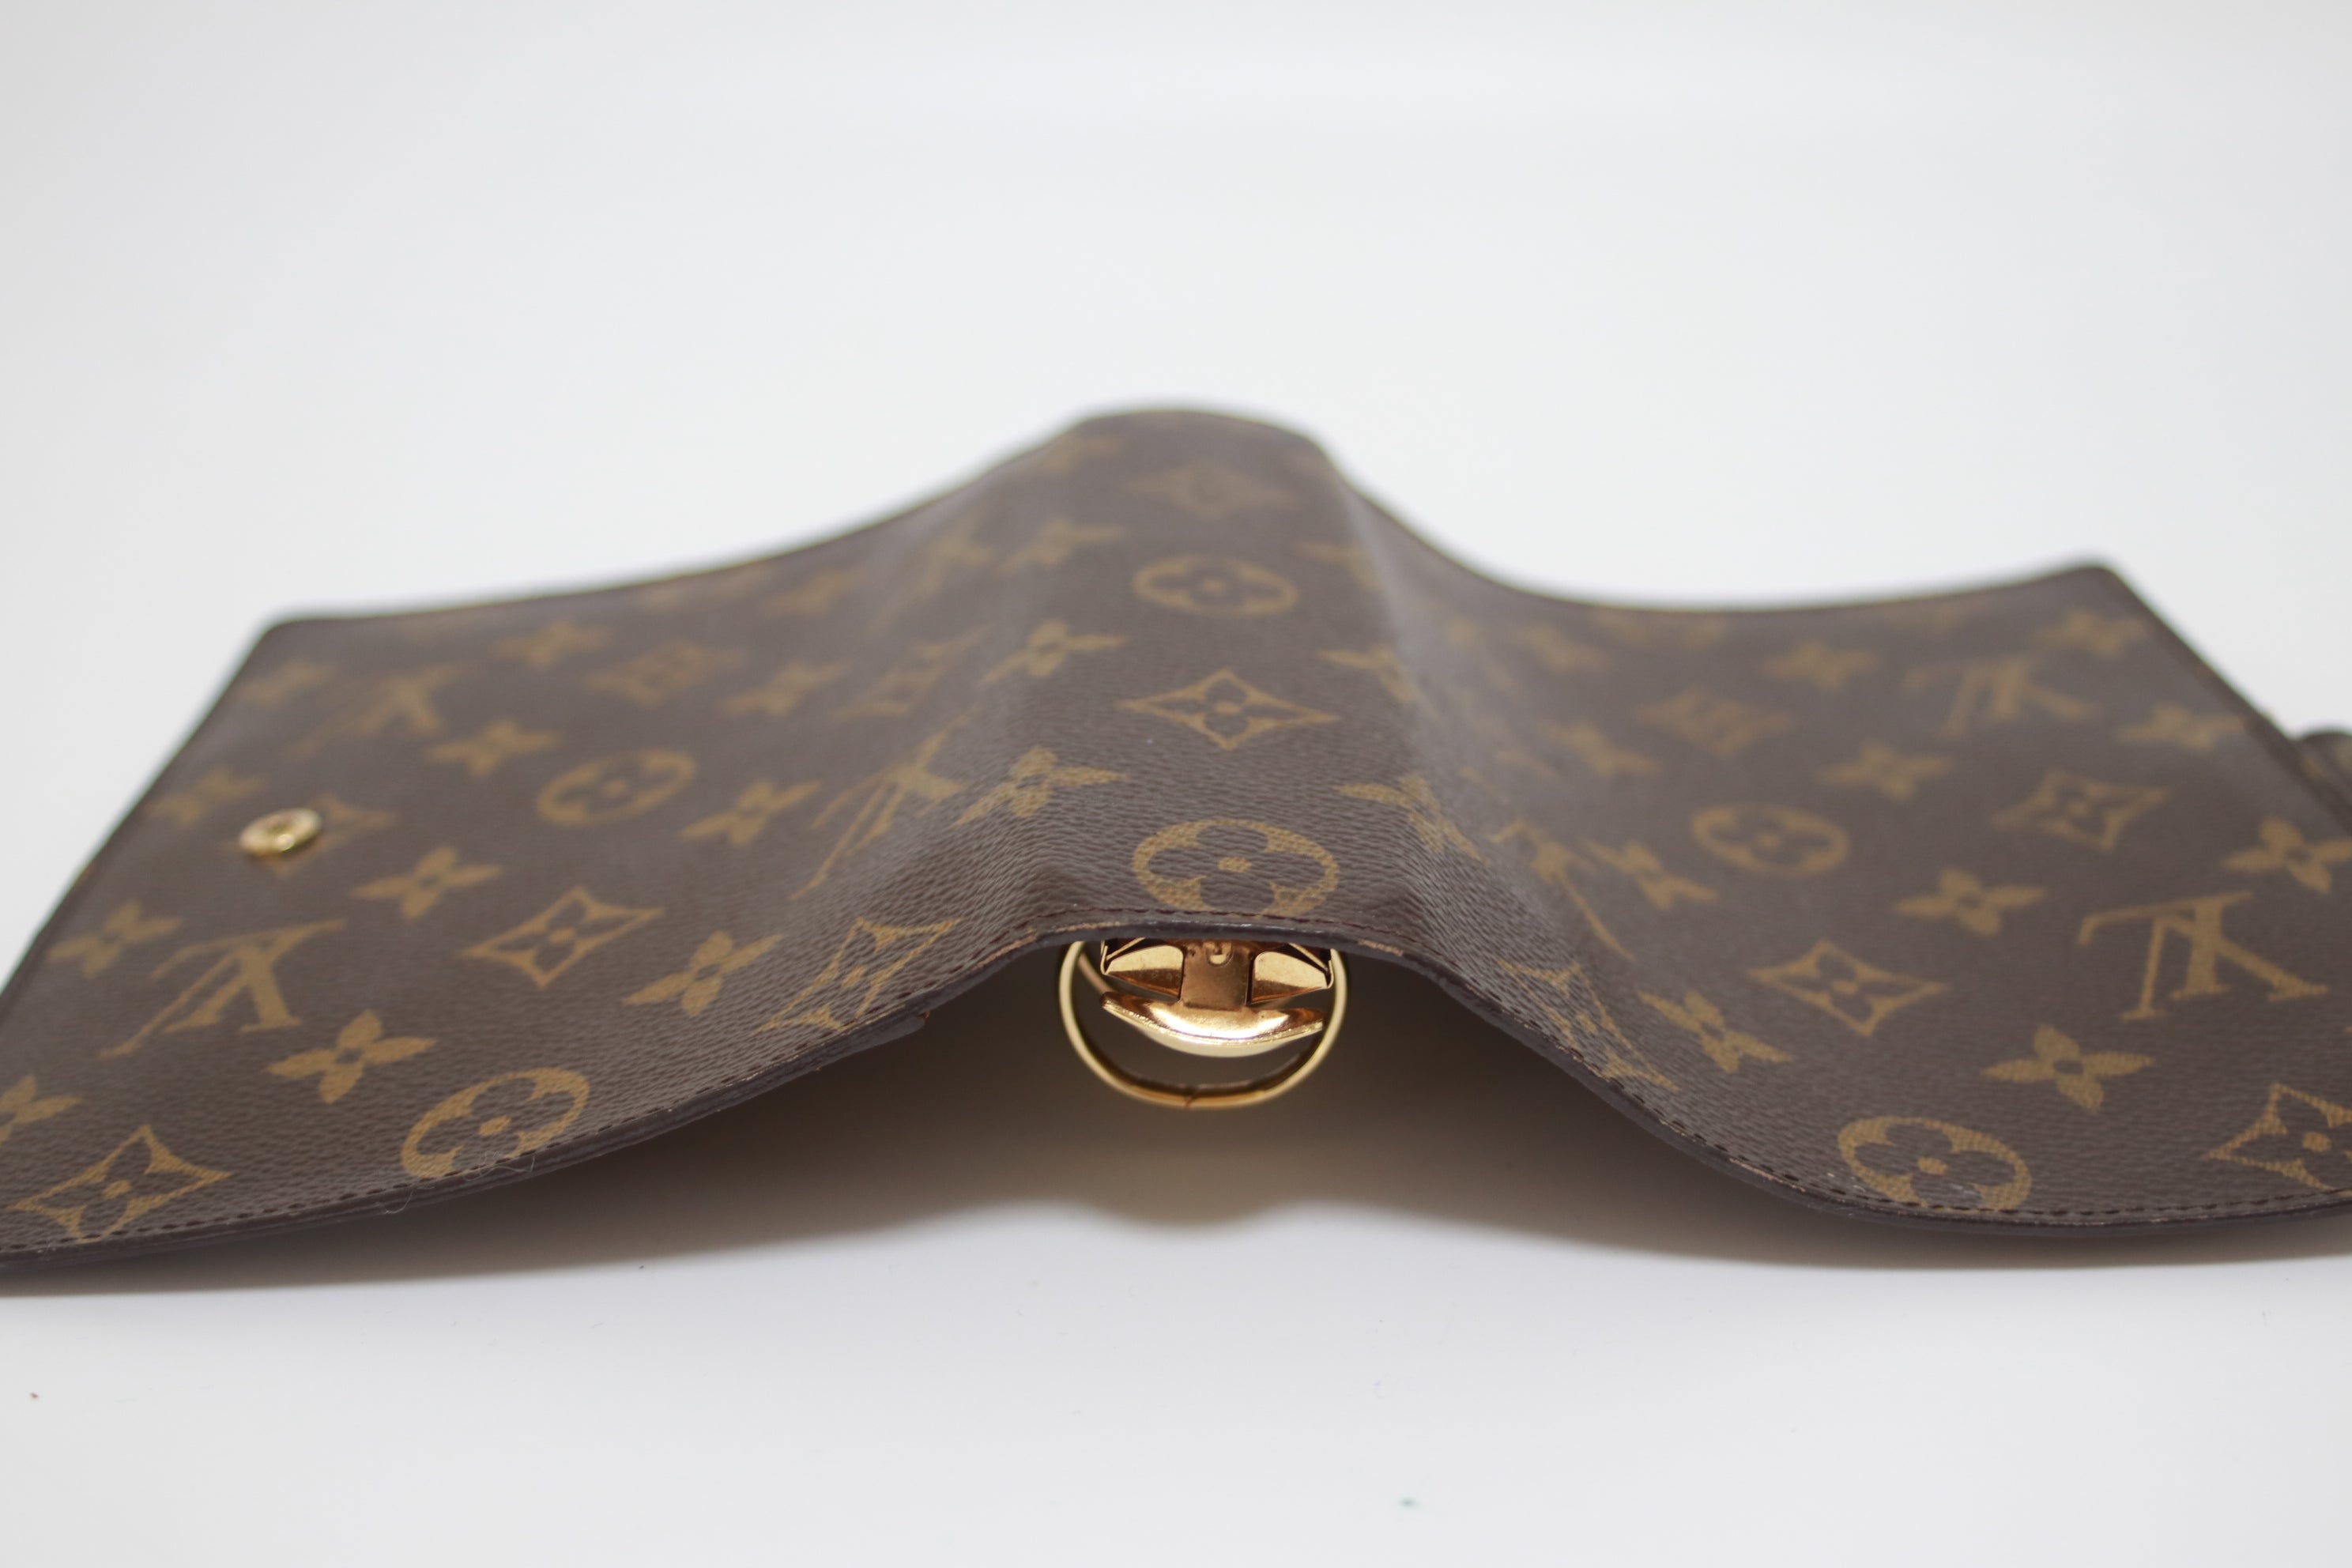 Louis Vuitton Agenda MM Cover Used (7260)